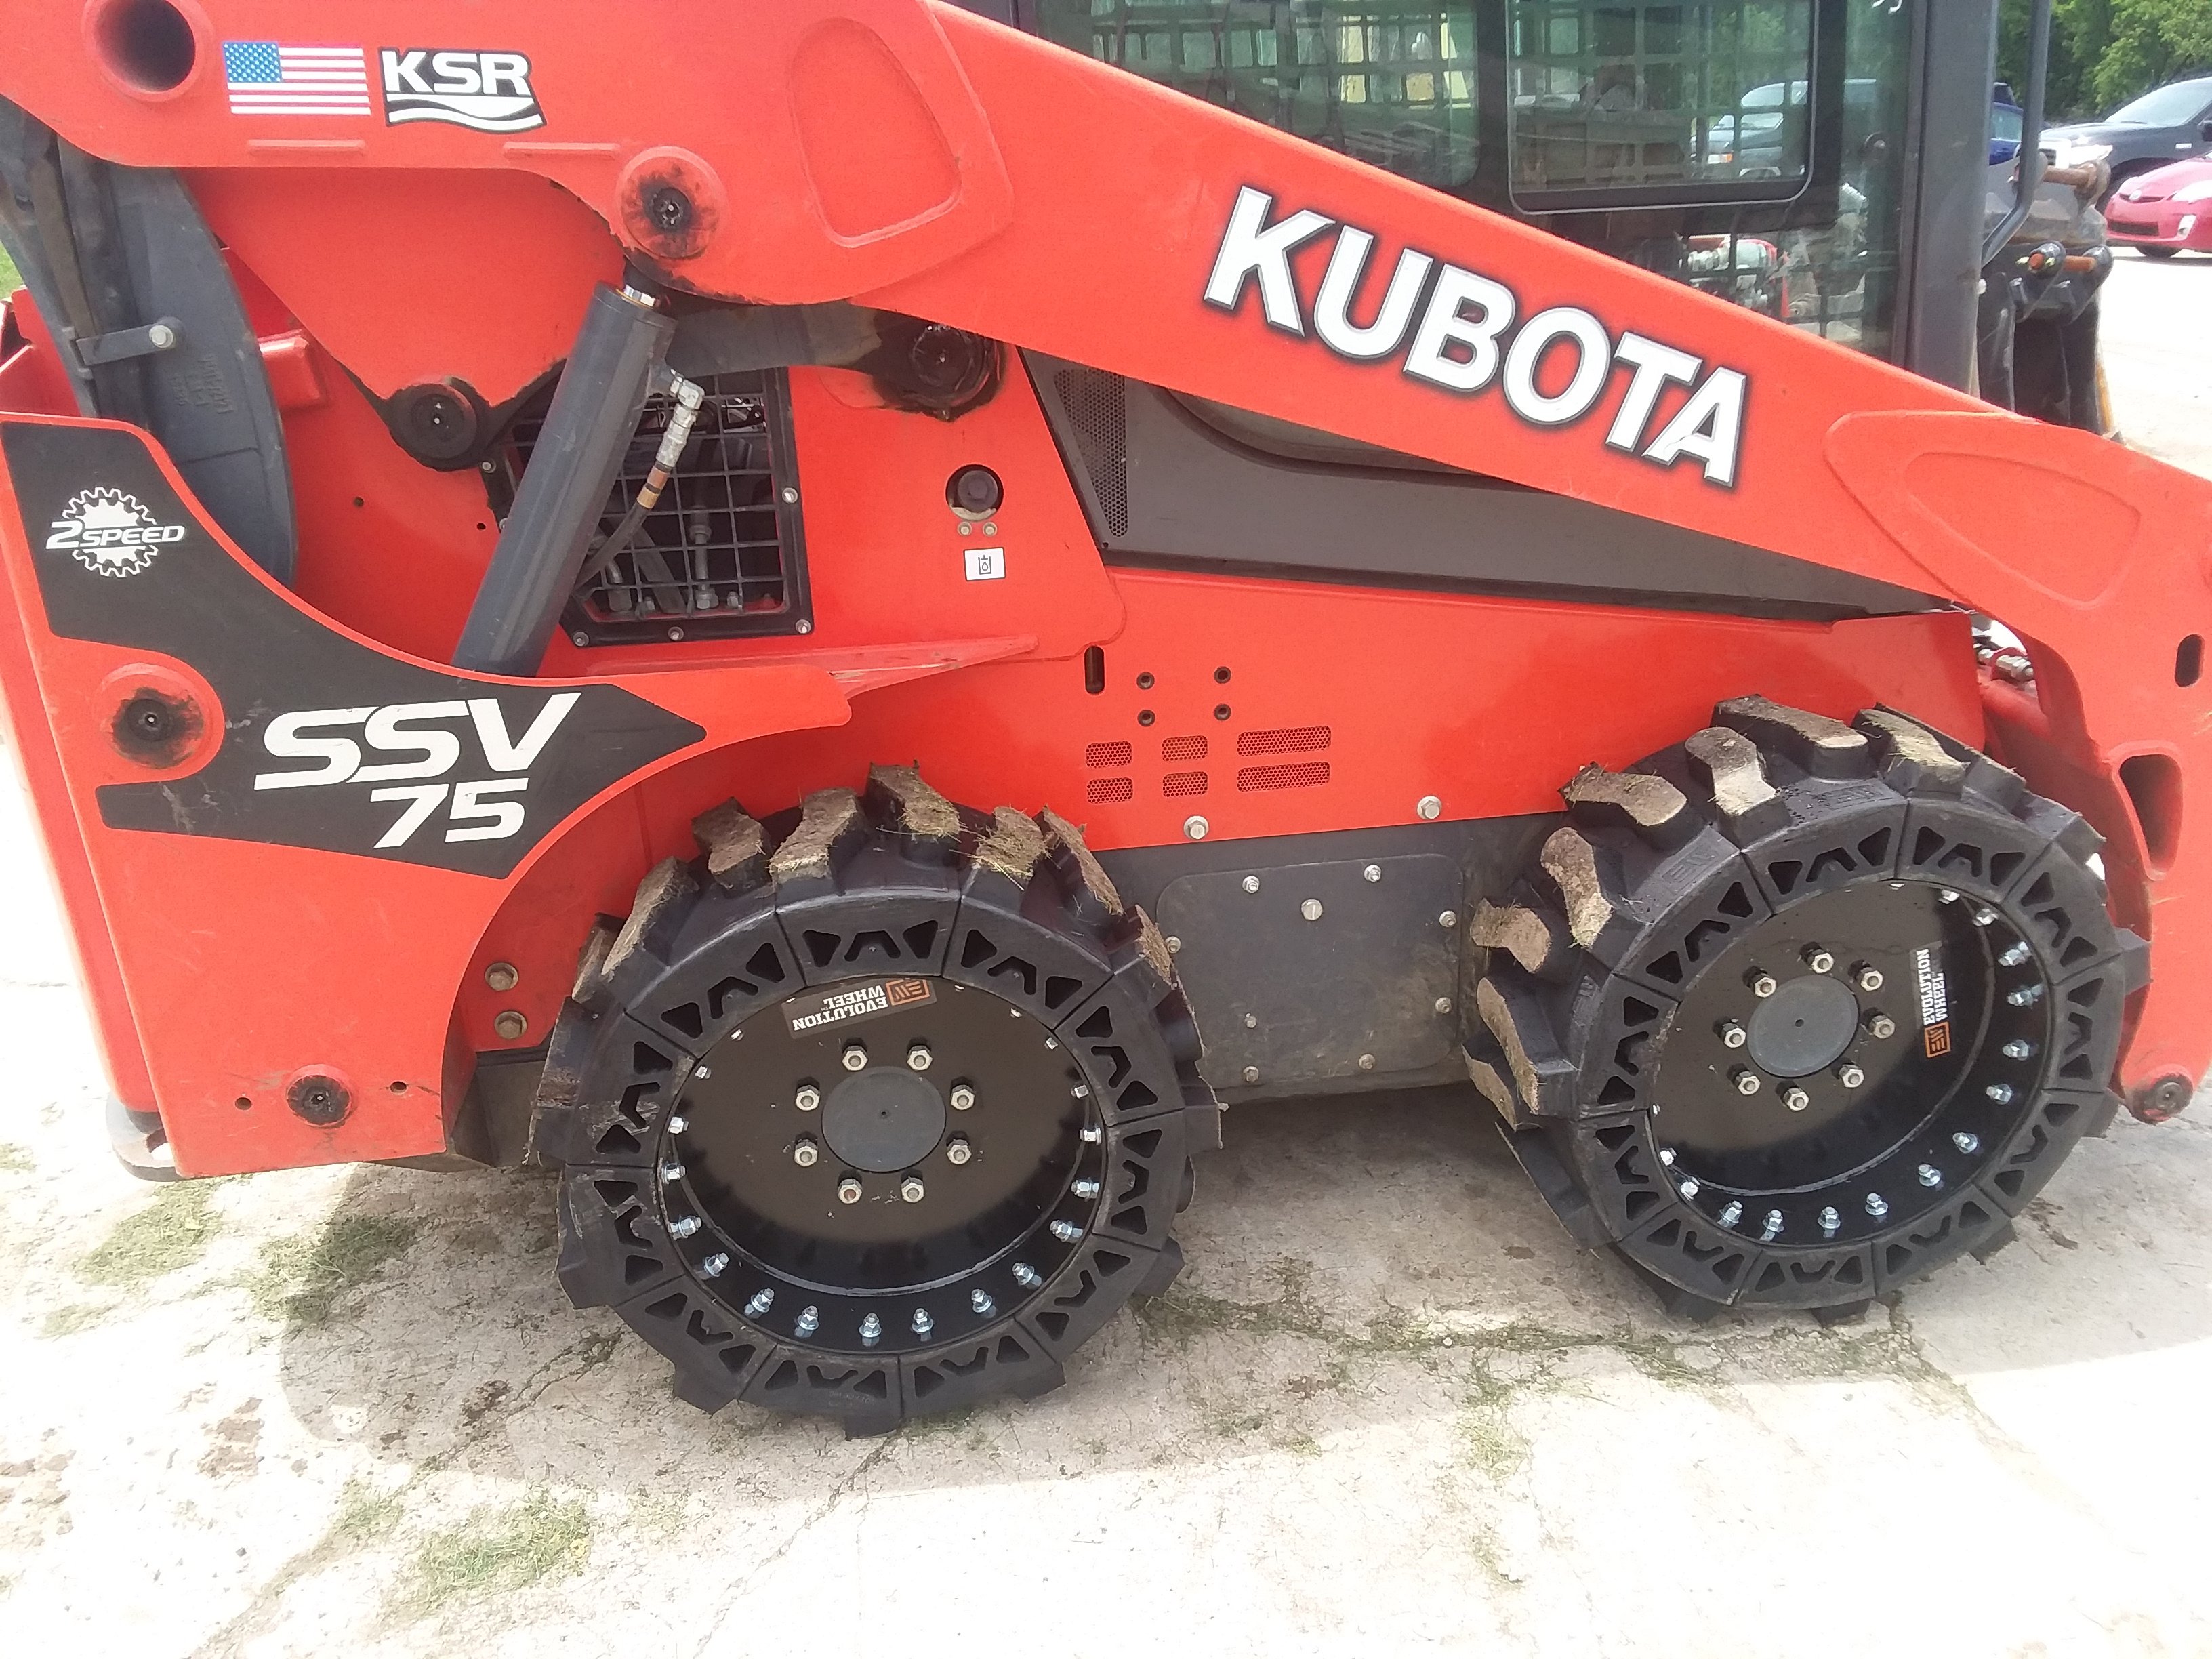 This images shows a red Kubota skid steer using our Bobcat all terrain skid steer tires